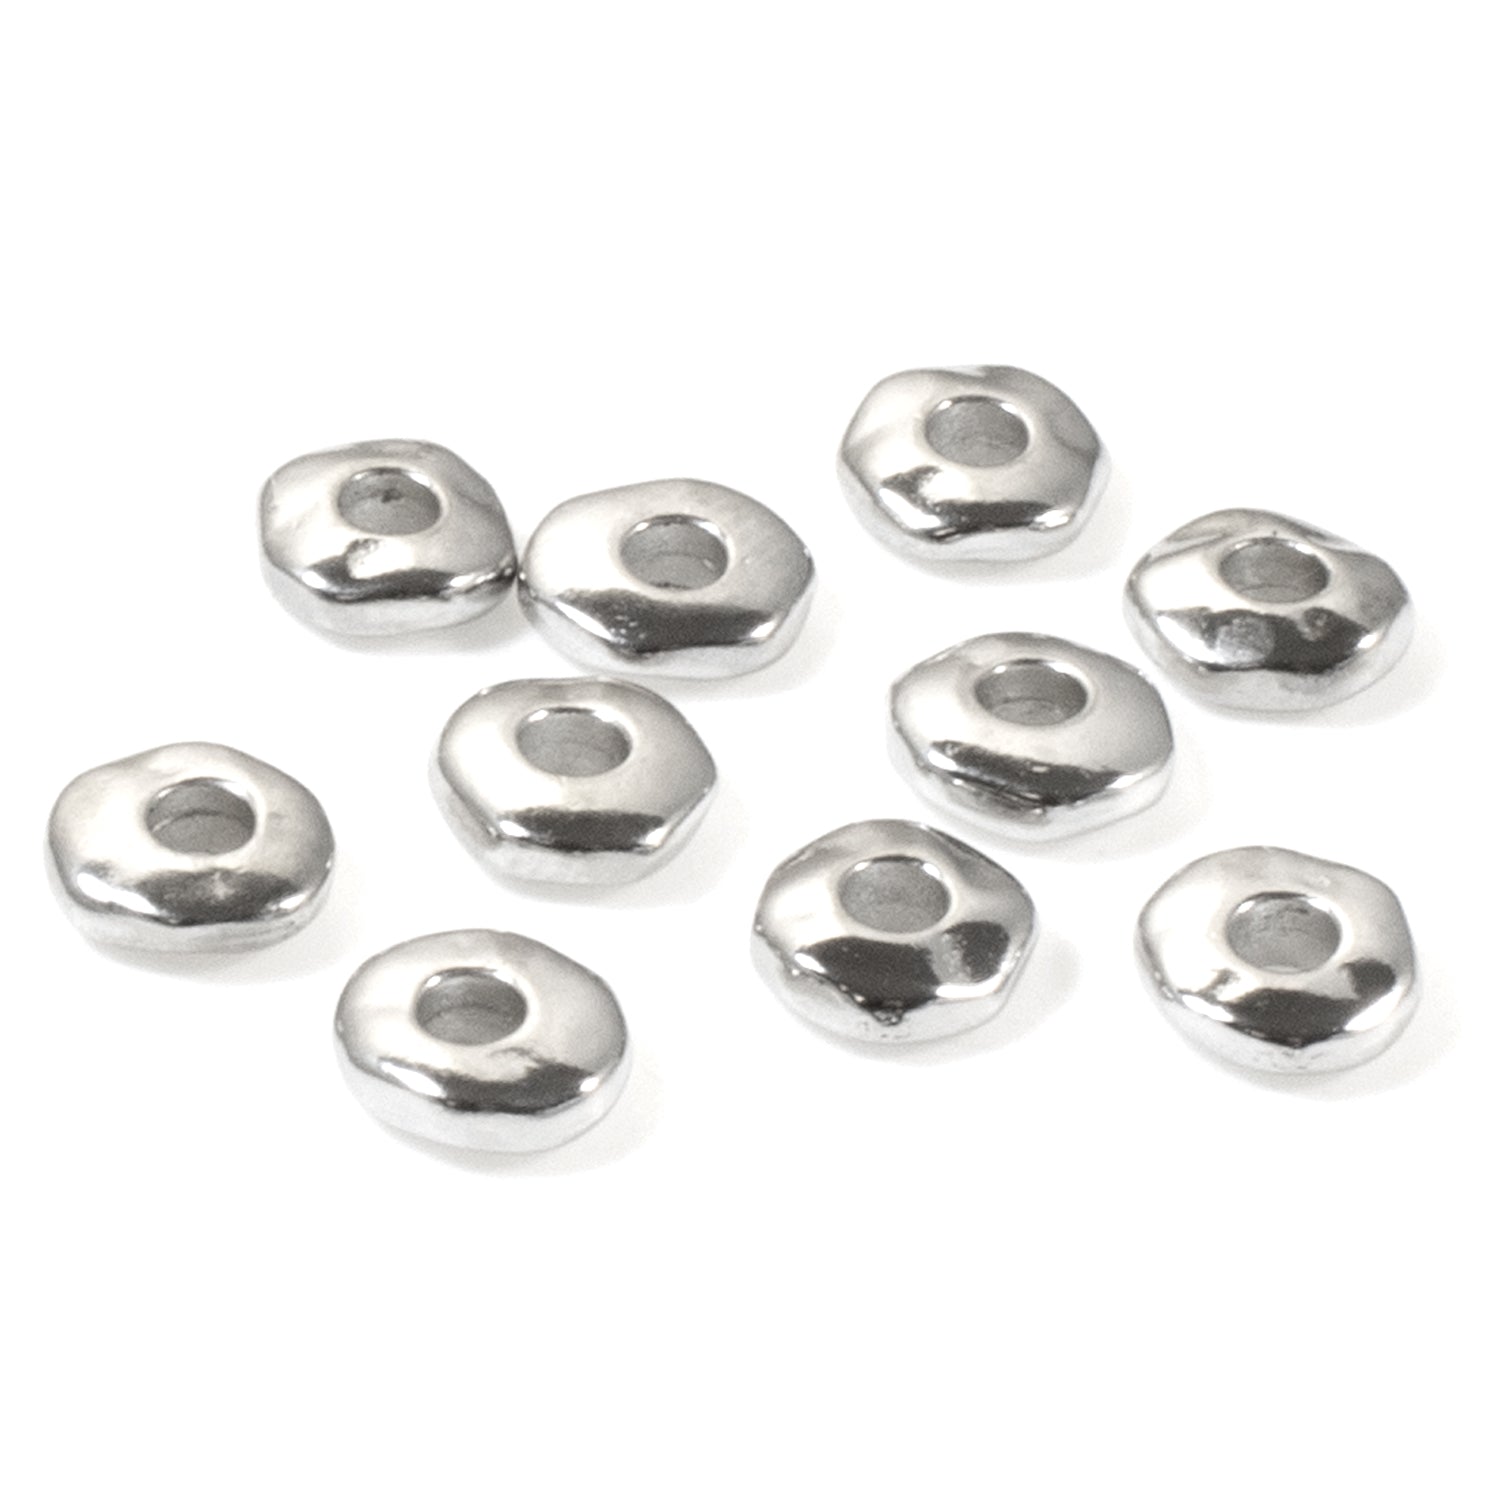 Silver Nugget 6mm Spacer Beads + Large 2mm Hole for Leather